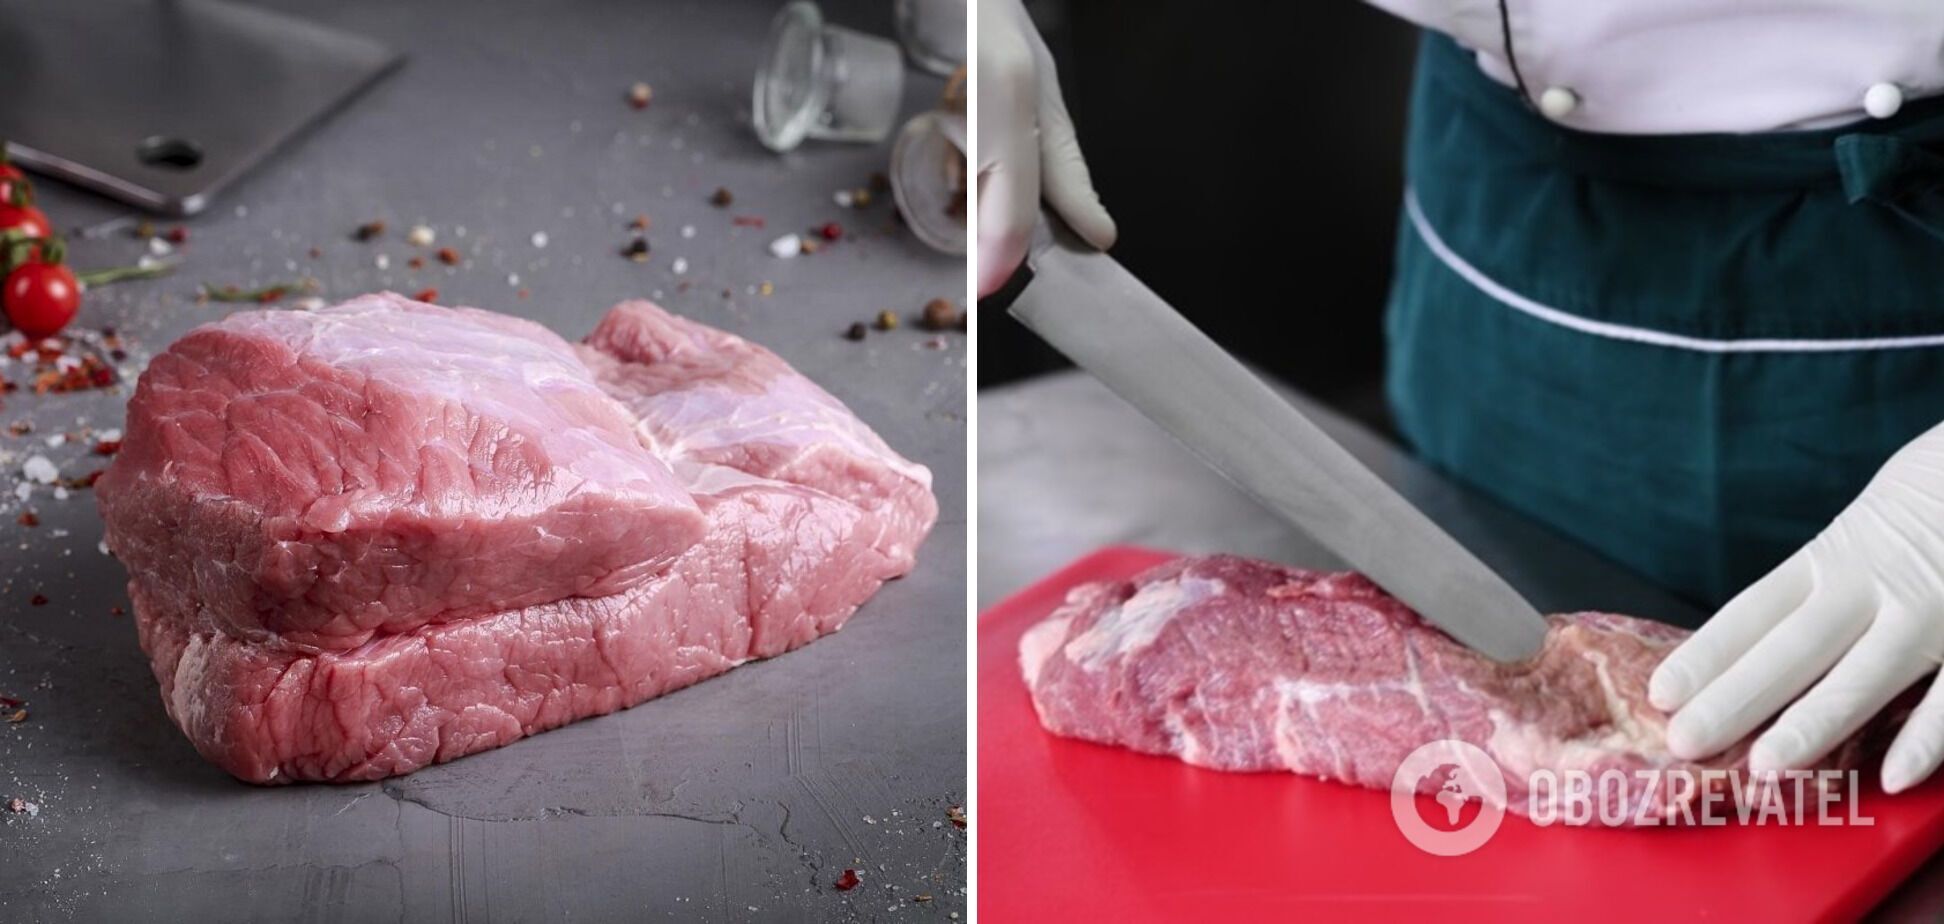 How not to fry chops: the most common mistakes